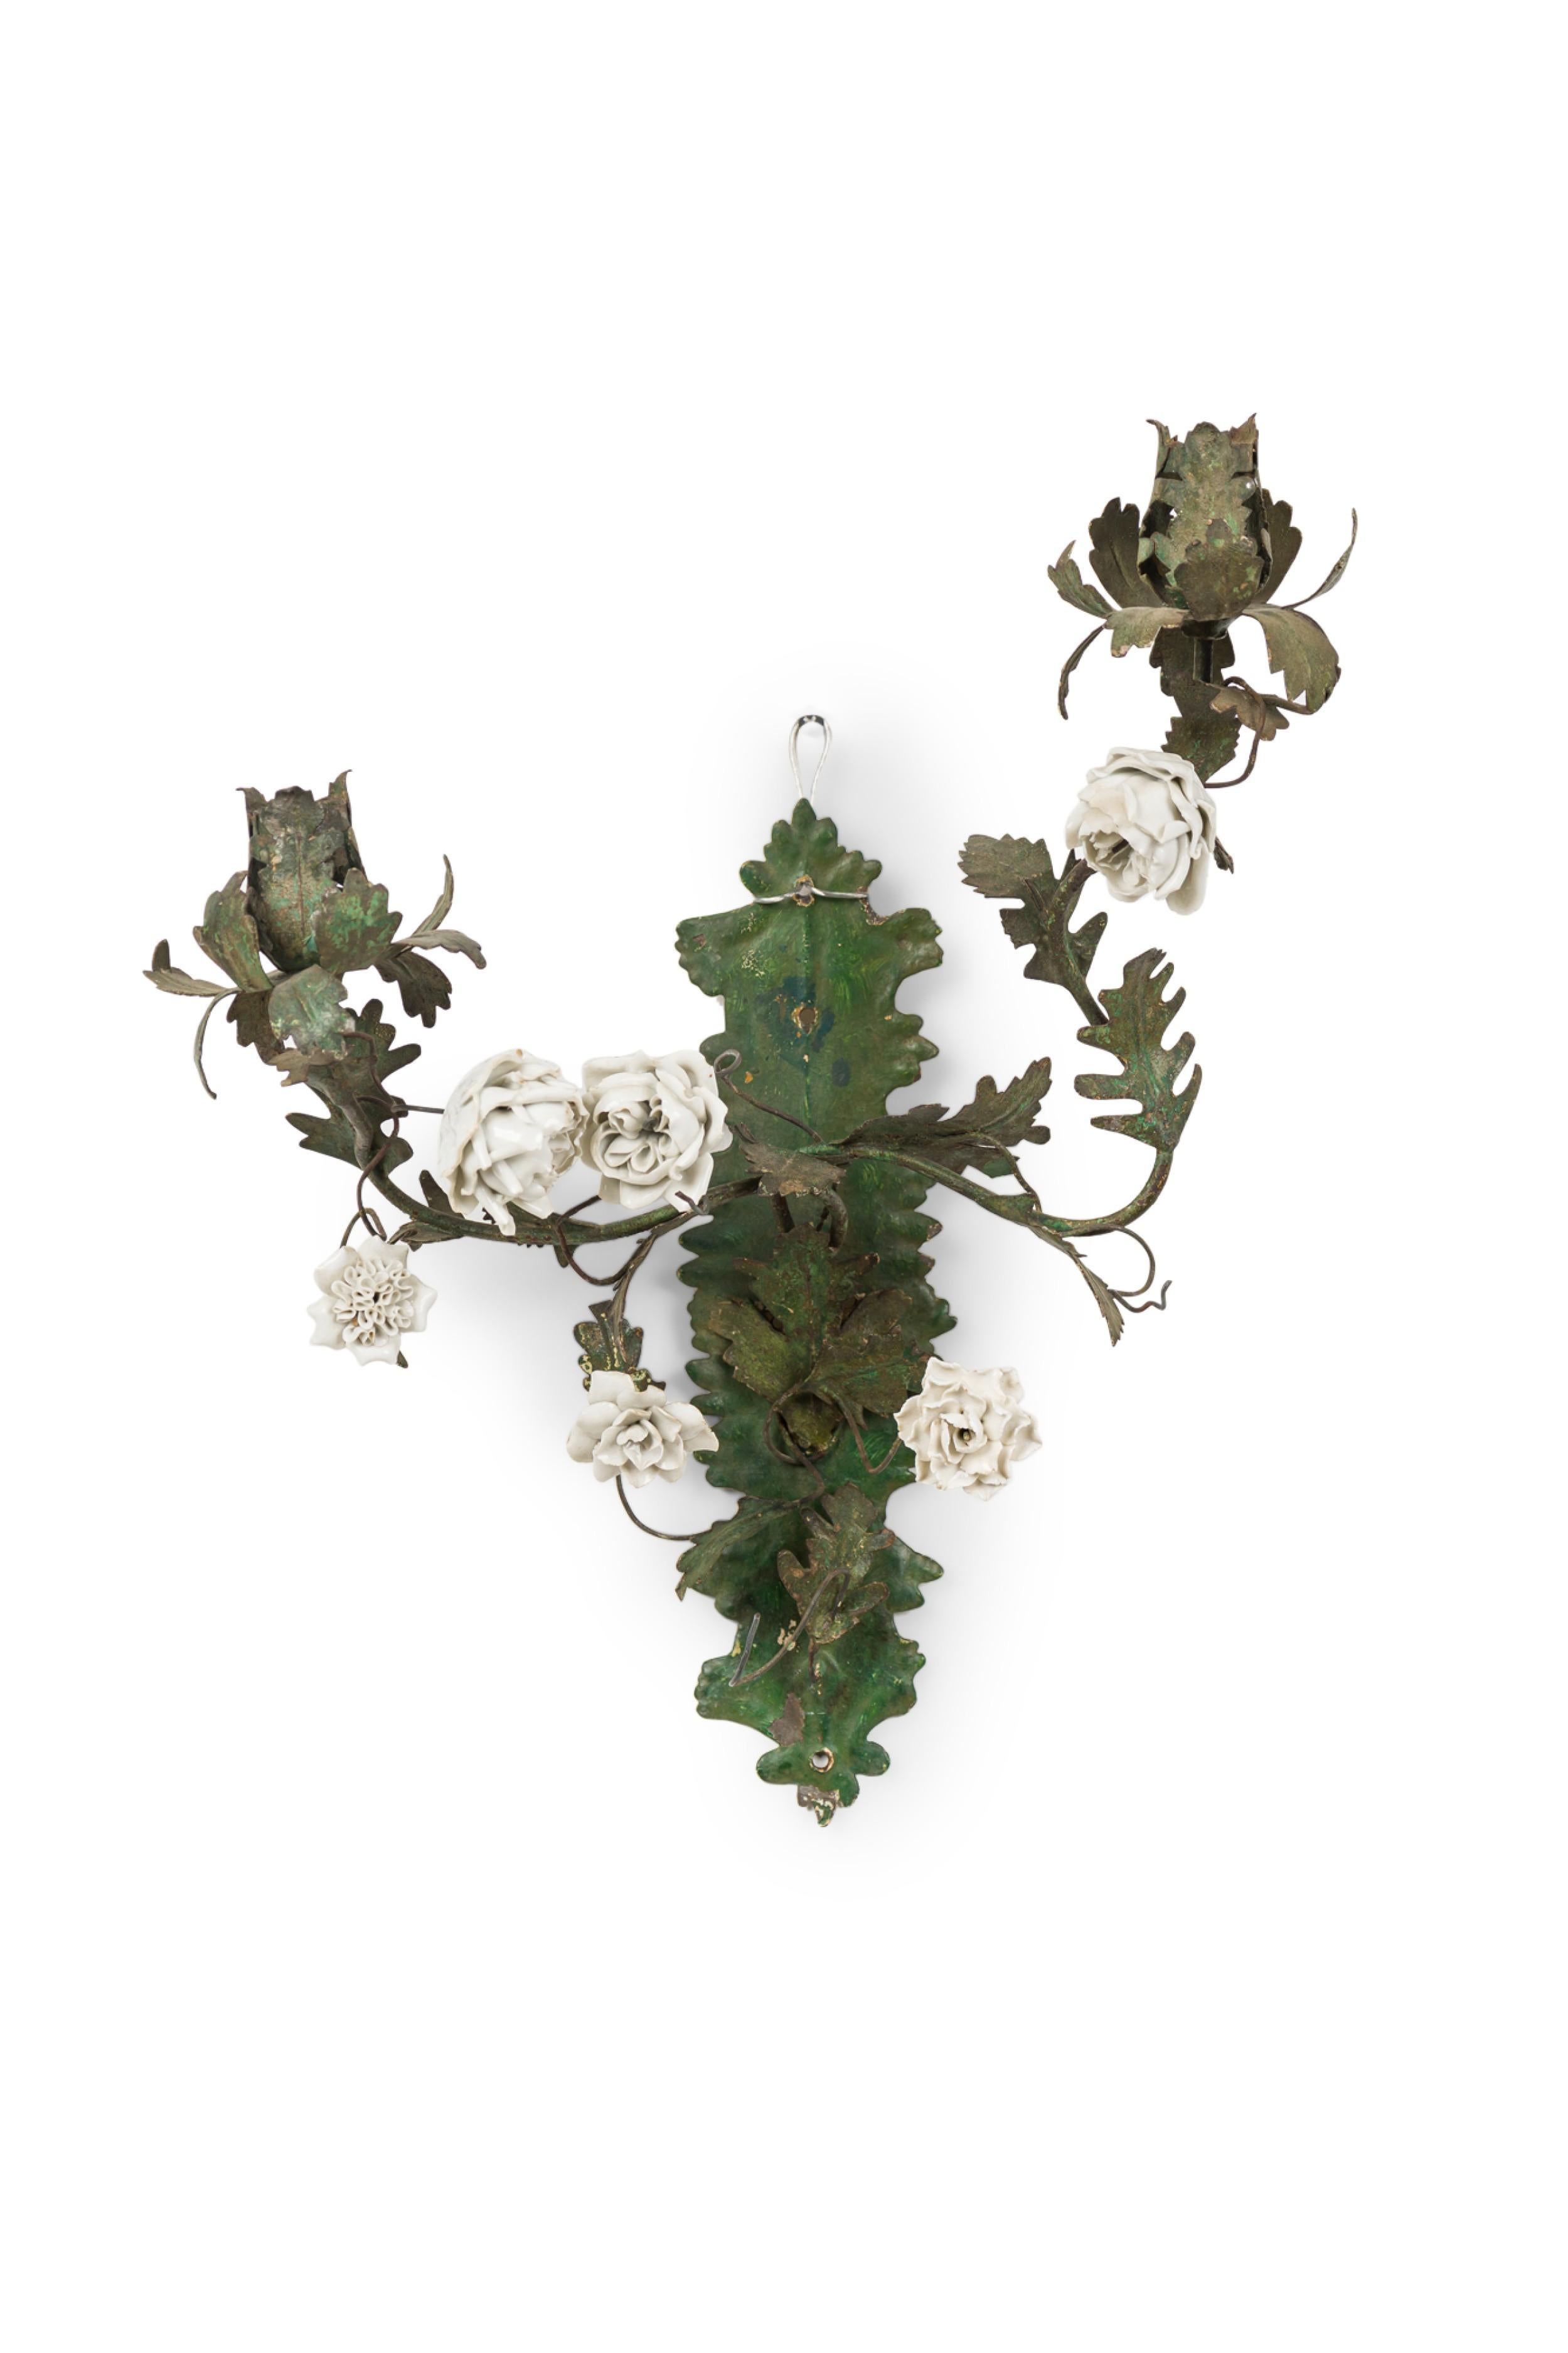 PAIR of Italian (19th Century) two-light floral wall appliqués / sconces featuring green enameled leaves and mount with attached off-white porcelain rosettes. (PRICED AS PAIR)
 

 Wear to finish.
